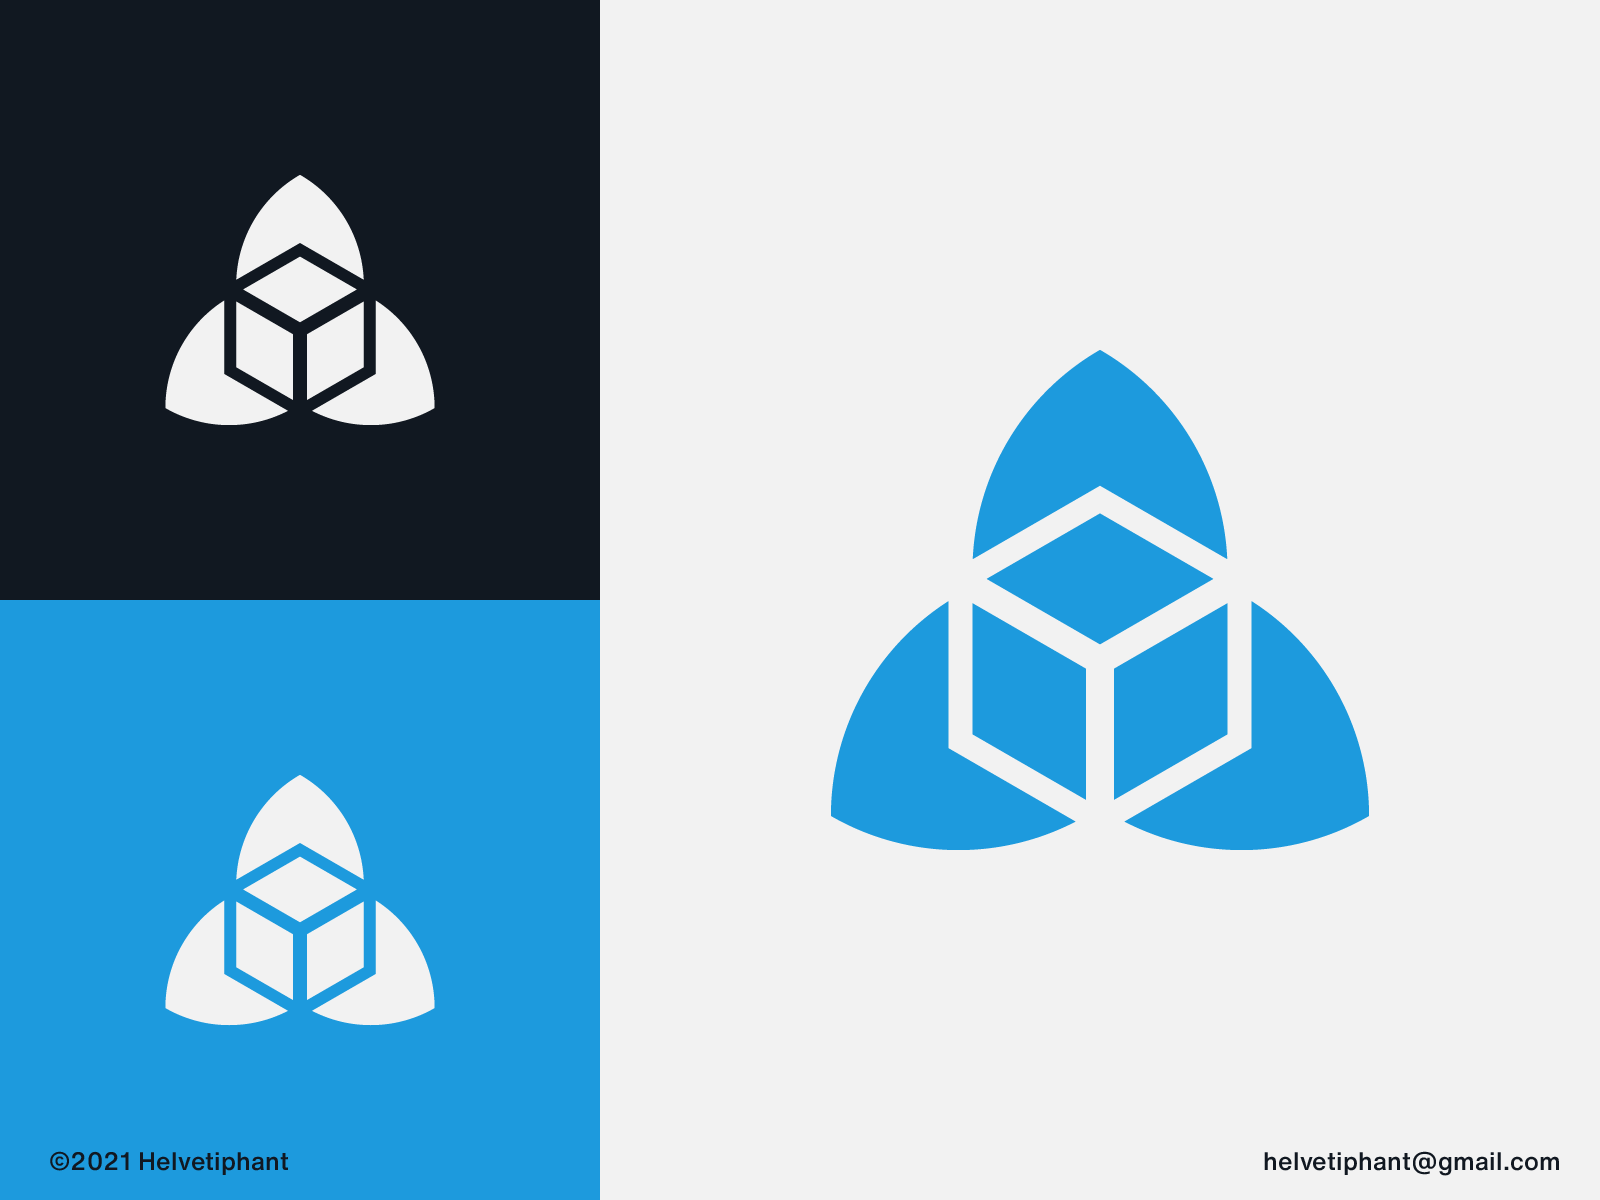 Tripack - logo concept by Helvetiphant™ on Dribbble